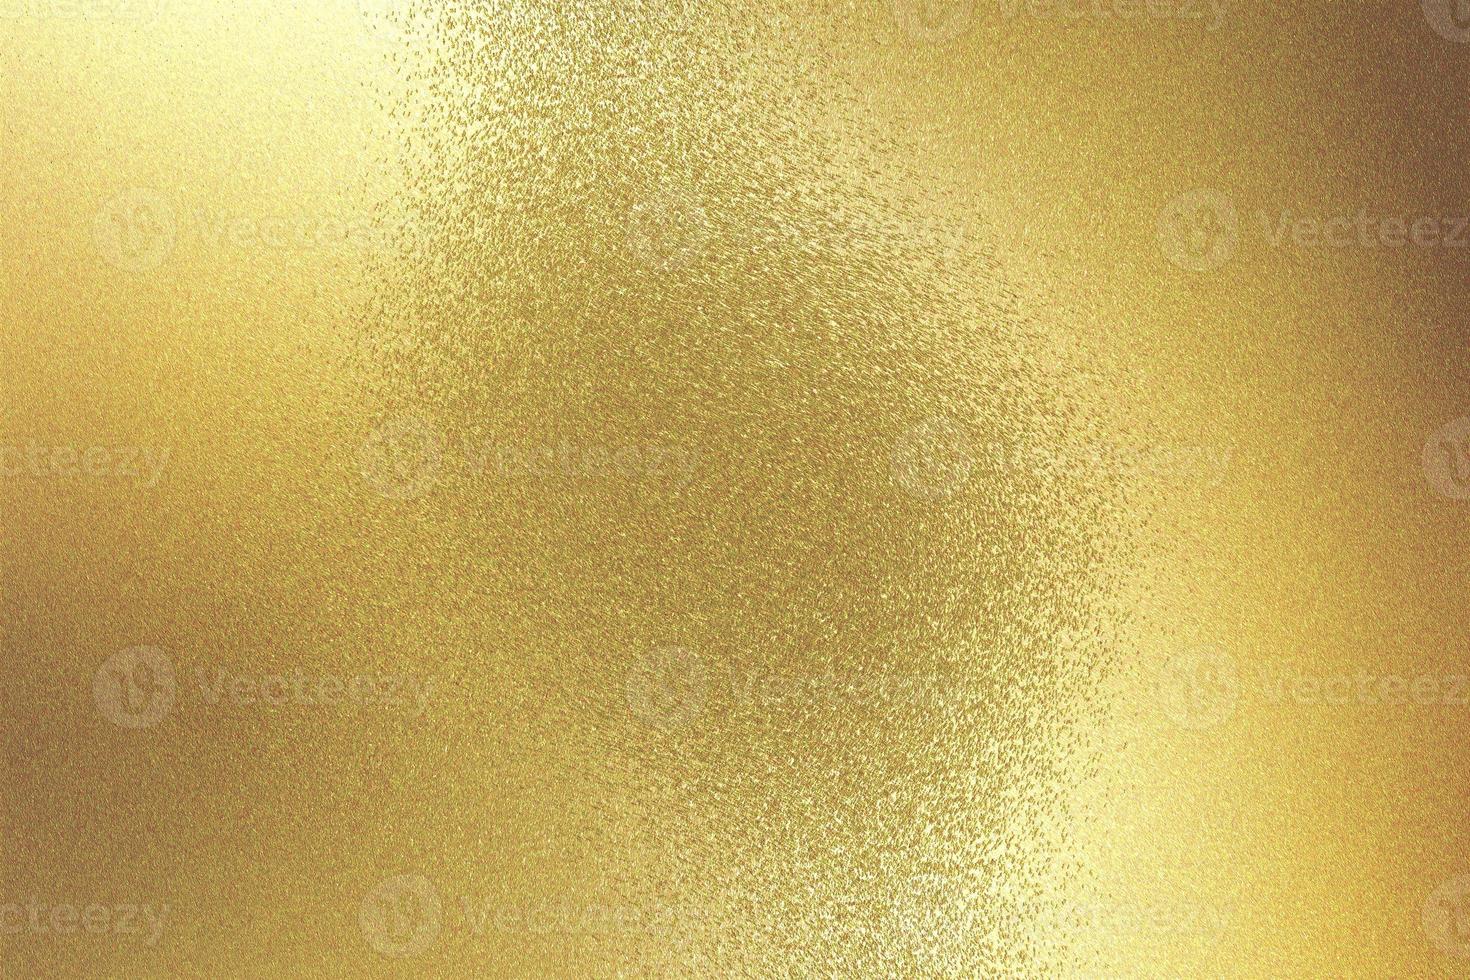 Glowing gold steel wall texture, abstract background photo